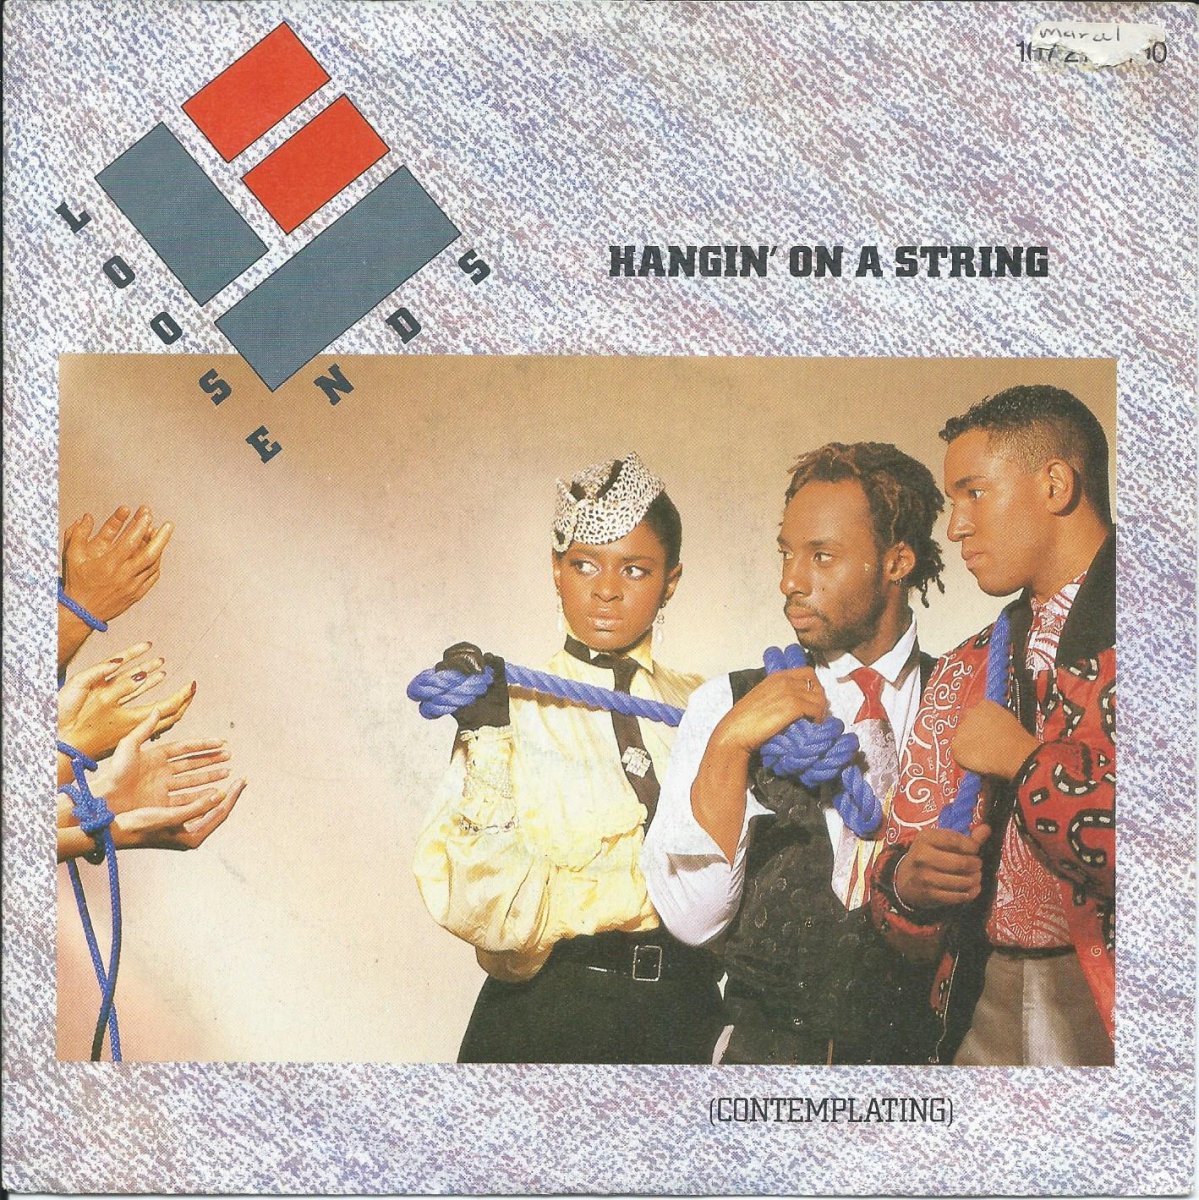 LOOSE ENDS ‎/ HANGIN' ON A STRING (CONTEMPLATING) / A LITTLE SPICE (7